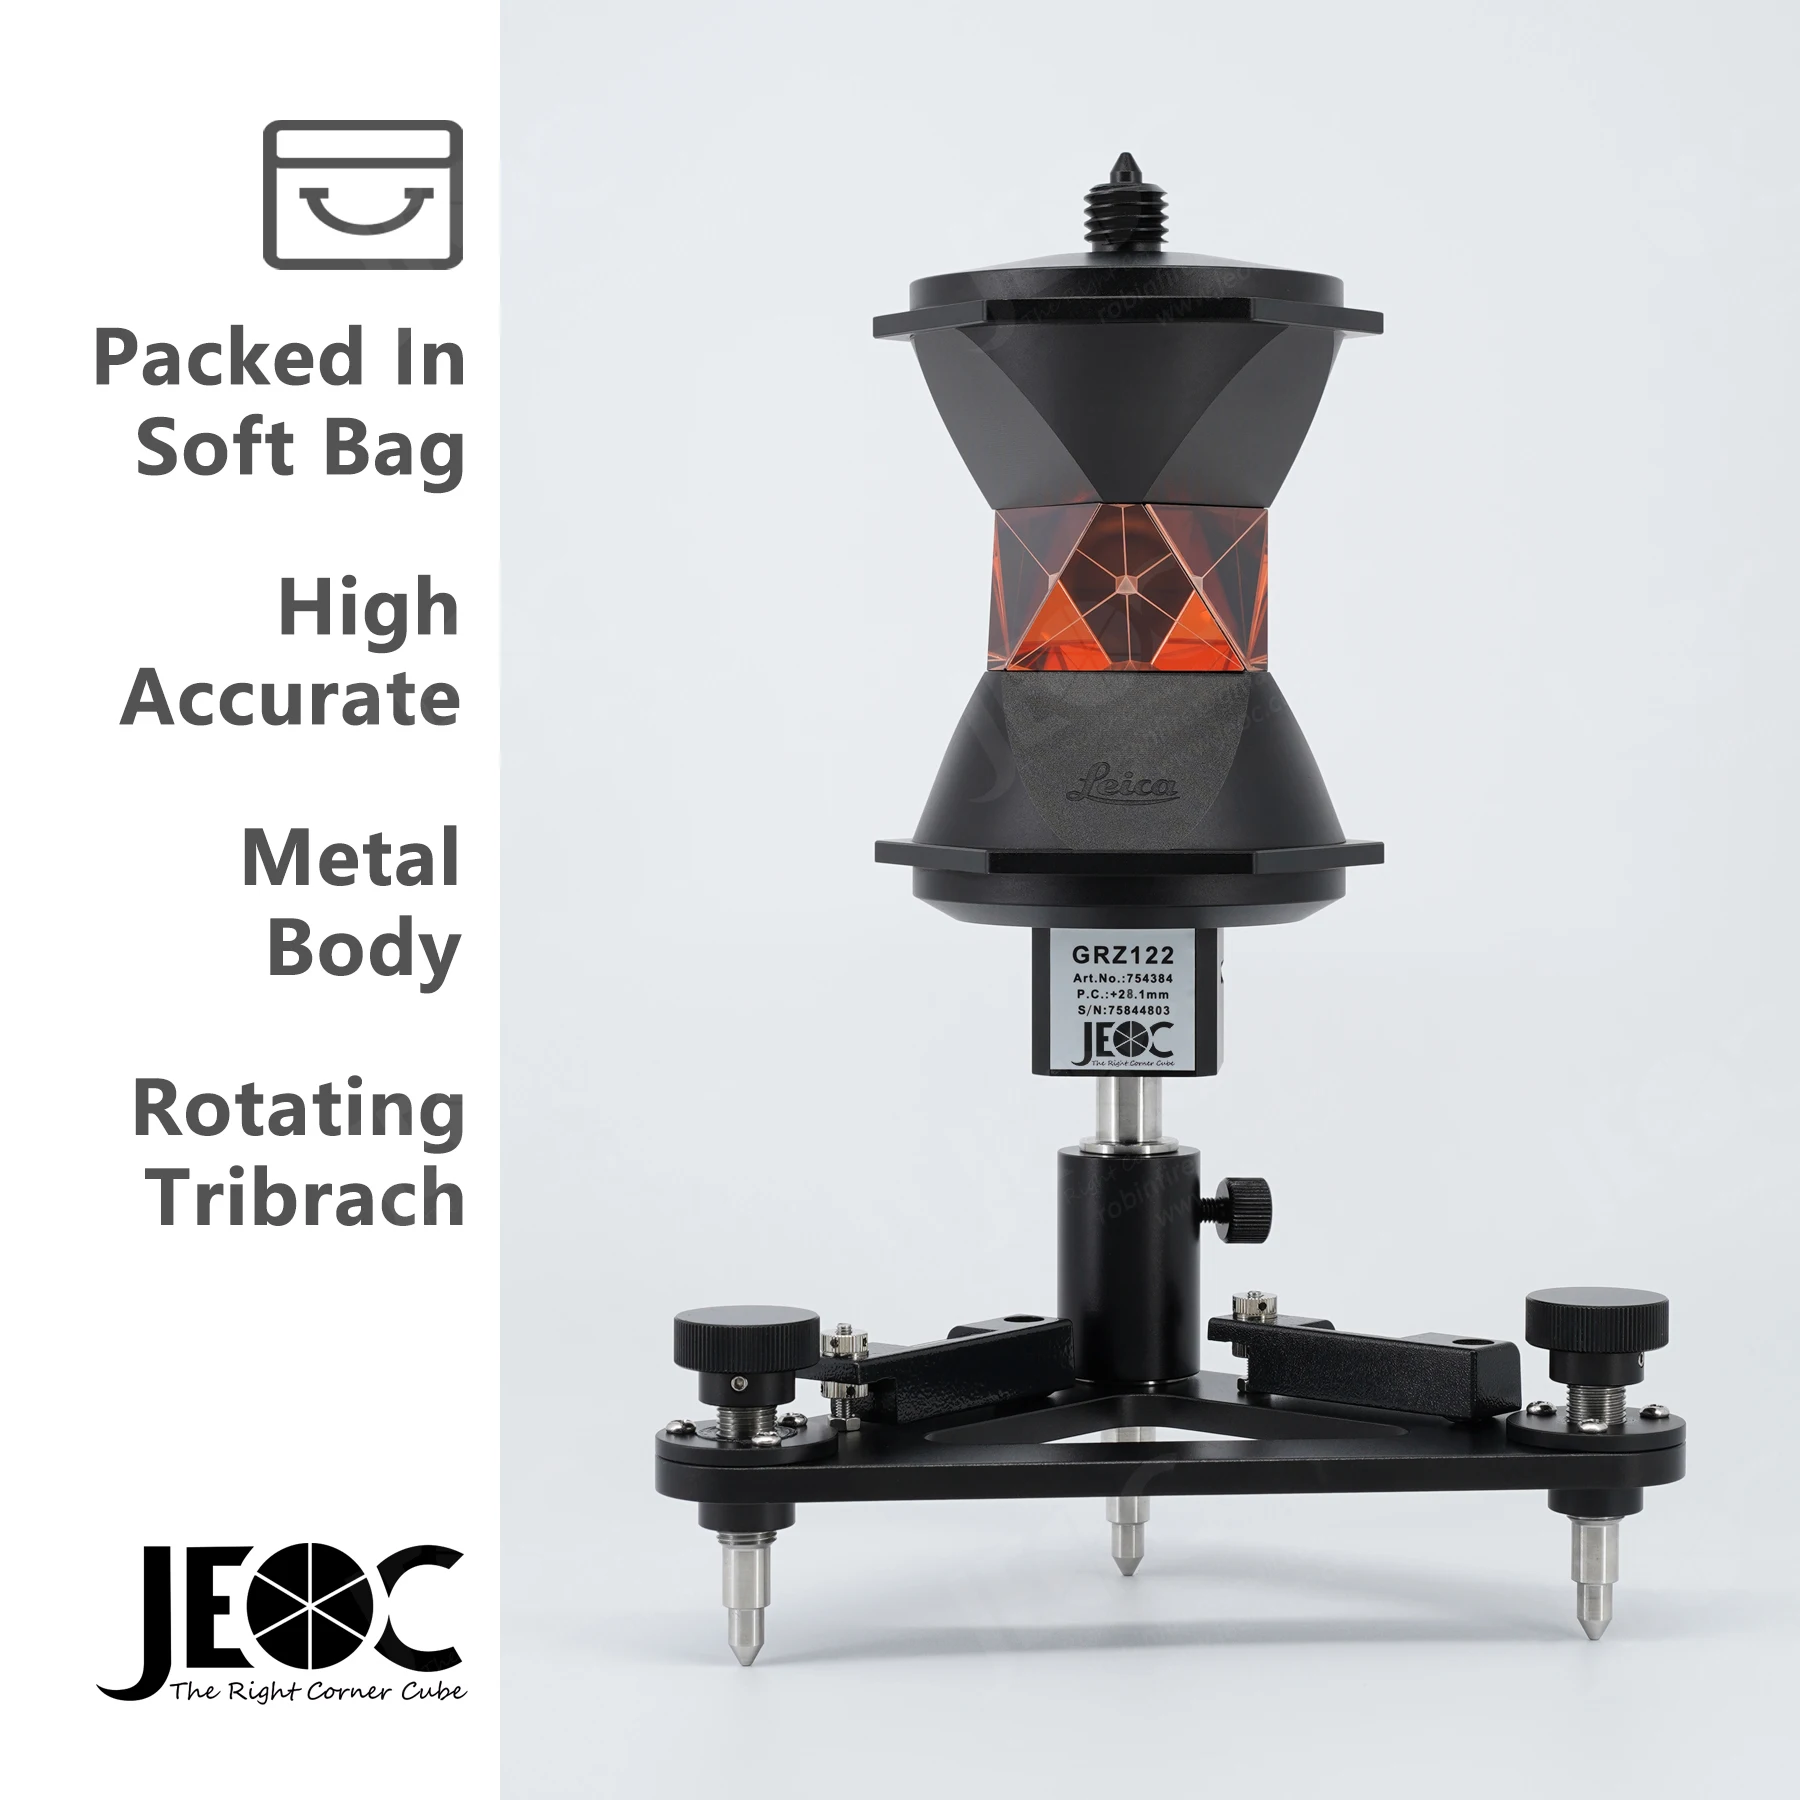 

JEOC GRZ122+ Tribrach, Light Weight Accurate 360 Degree Prism with Metal Holder for Leica Totalstation Accessories Topography